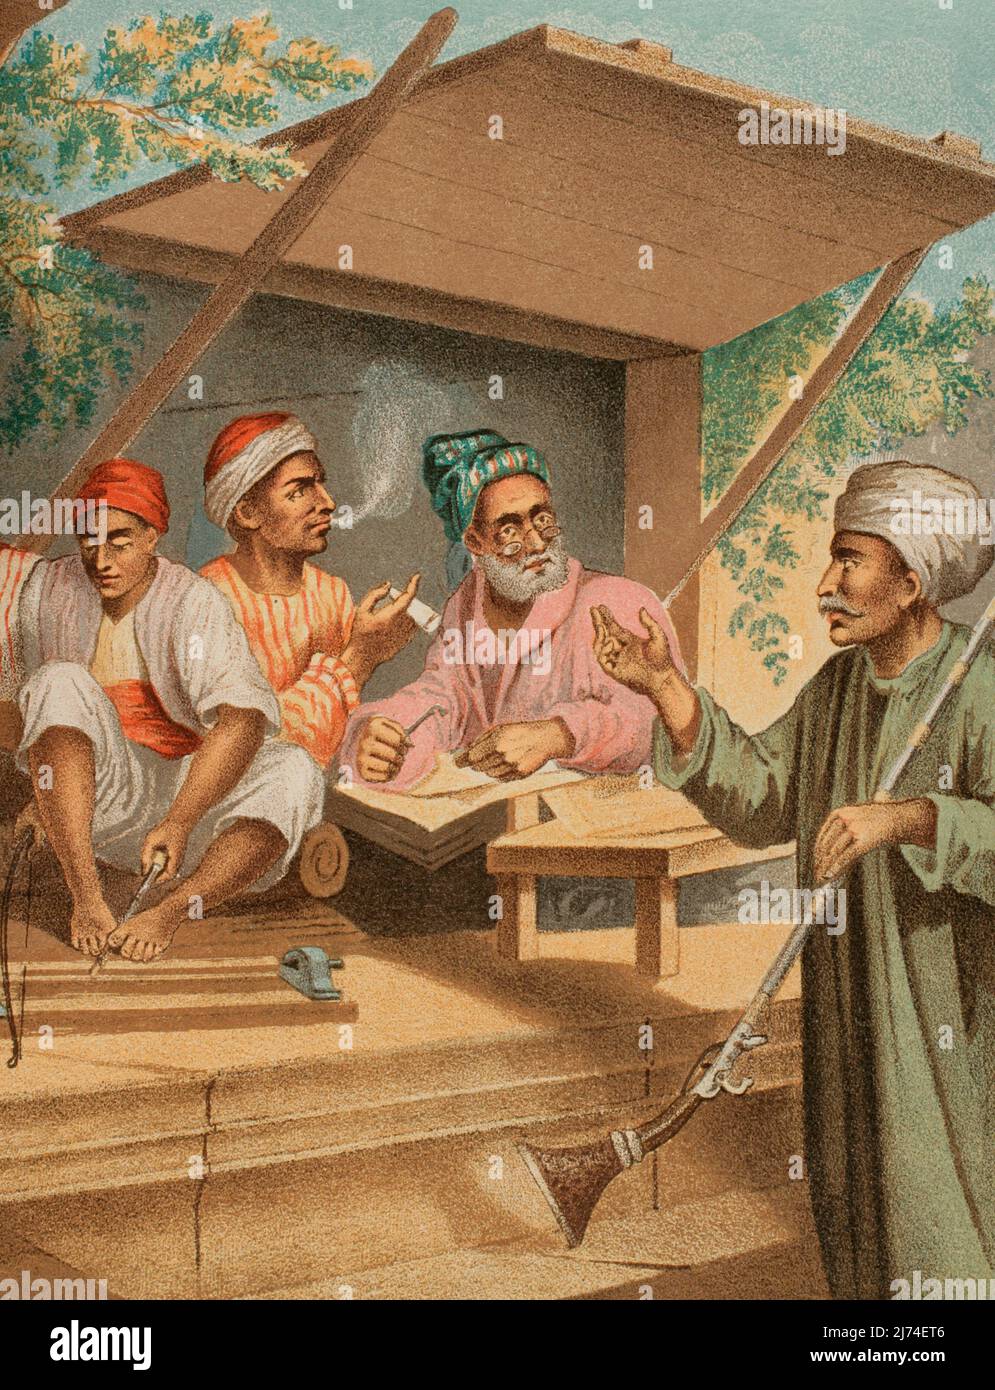 Turkish craftsmen in Constantinople. From left to right: wood turner, babouche embroiderer and gunsmith. Chromolithography. Illustration by José Acevedo. Lithograph by José Maria Mateu. Detail. "Viaje a Oriente", 1878. Author: José Acevedo. Spanish artist of the mid-19th century. Stock Photo